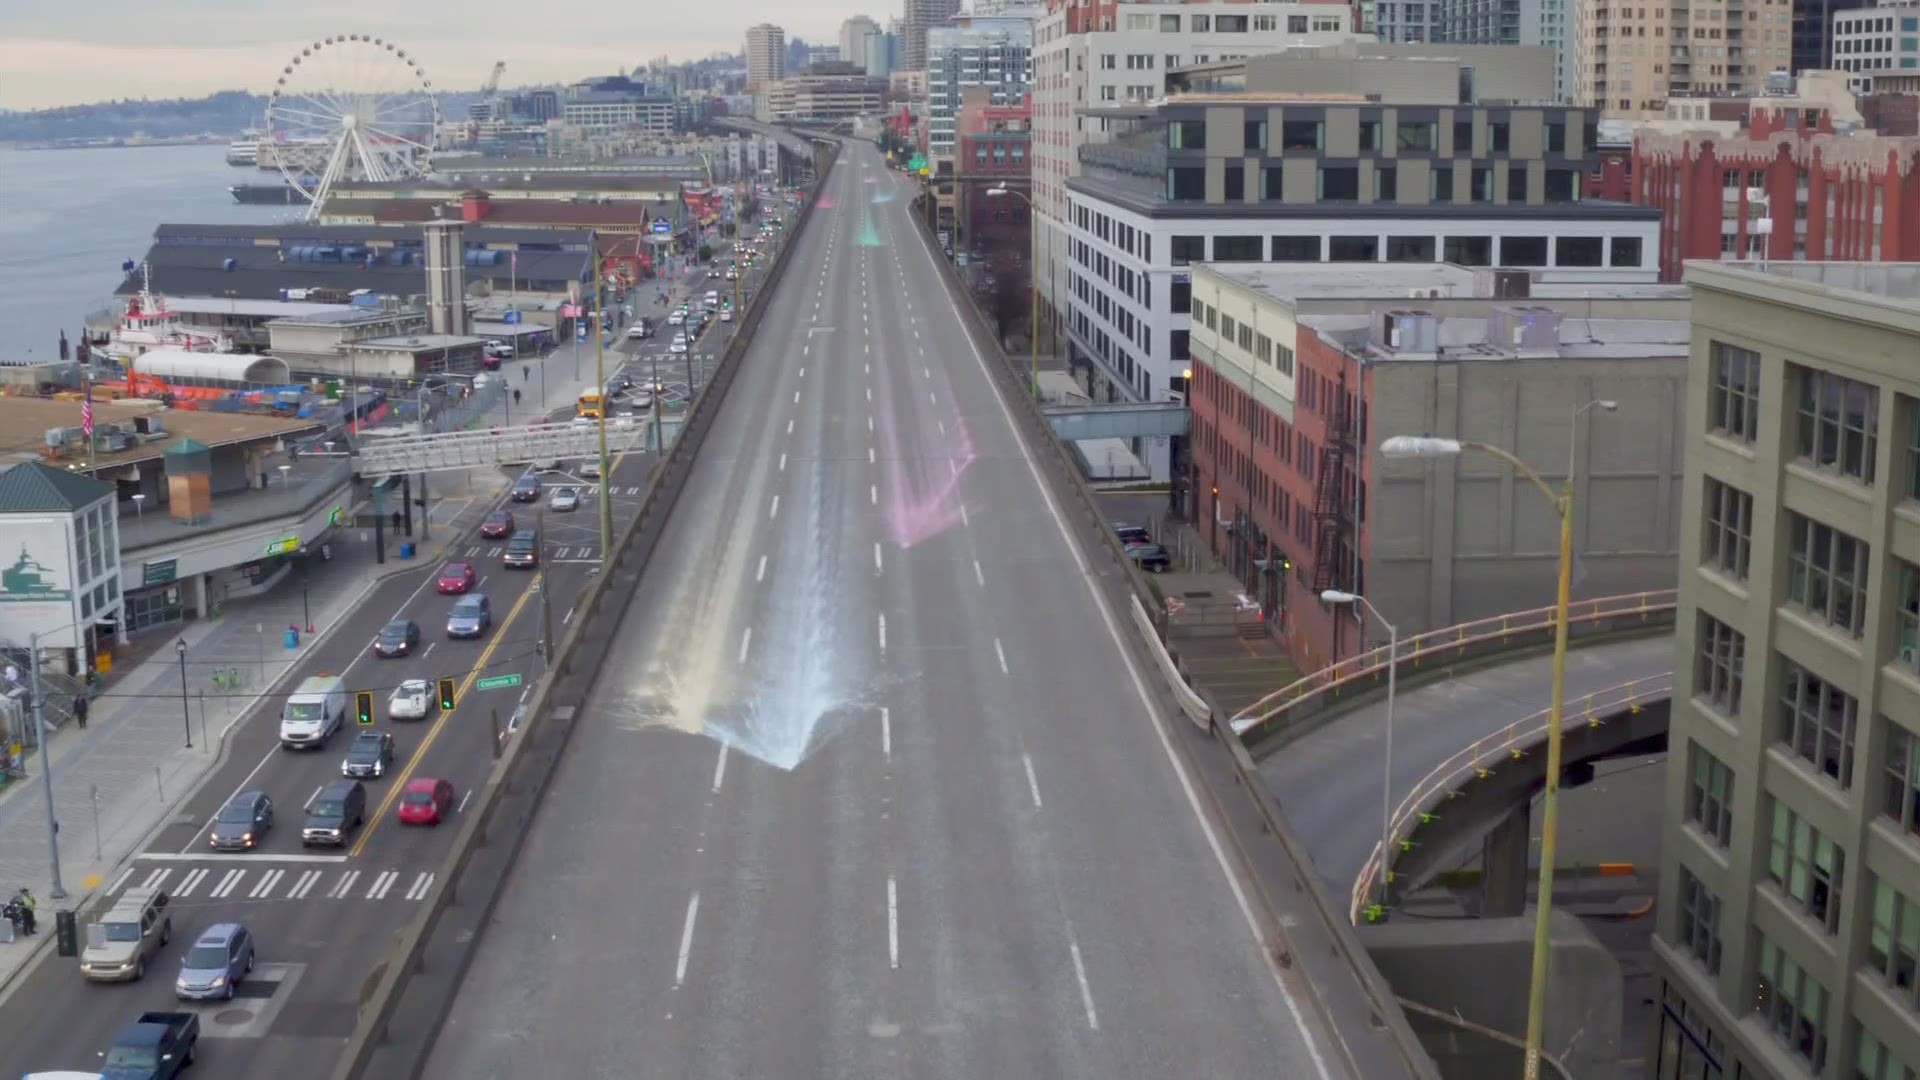 KING 5 drone "Dexter" flew over Seattle's now-empty viaduct on Tuesday.